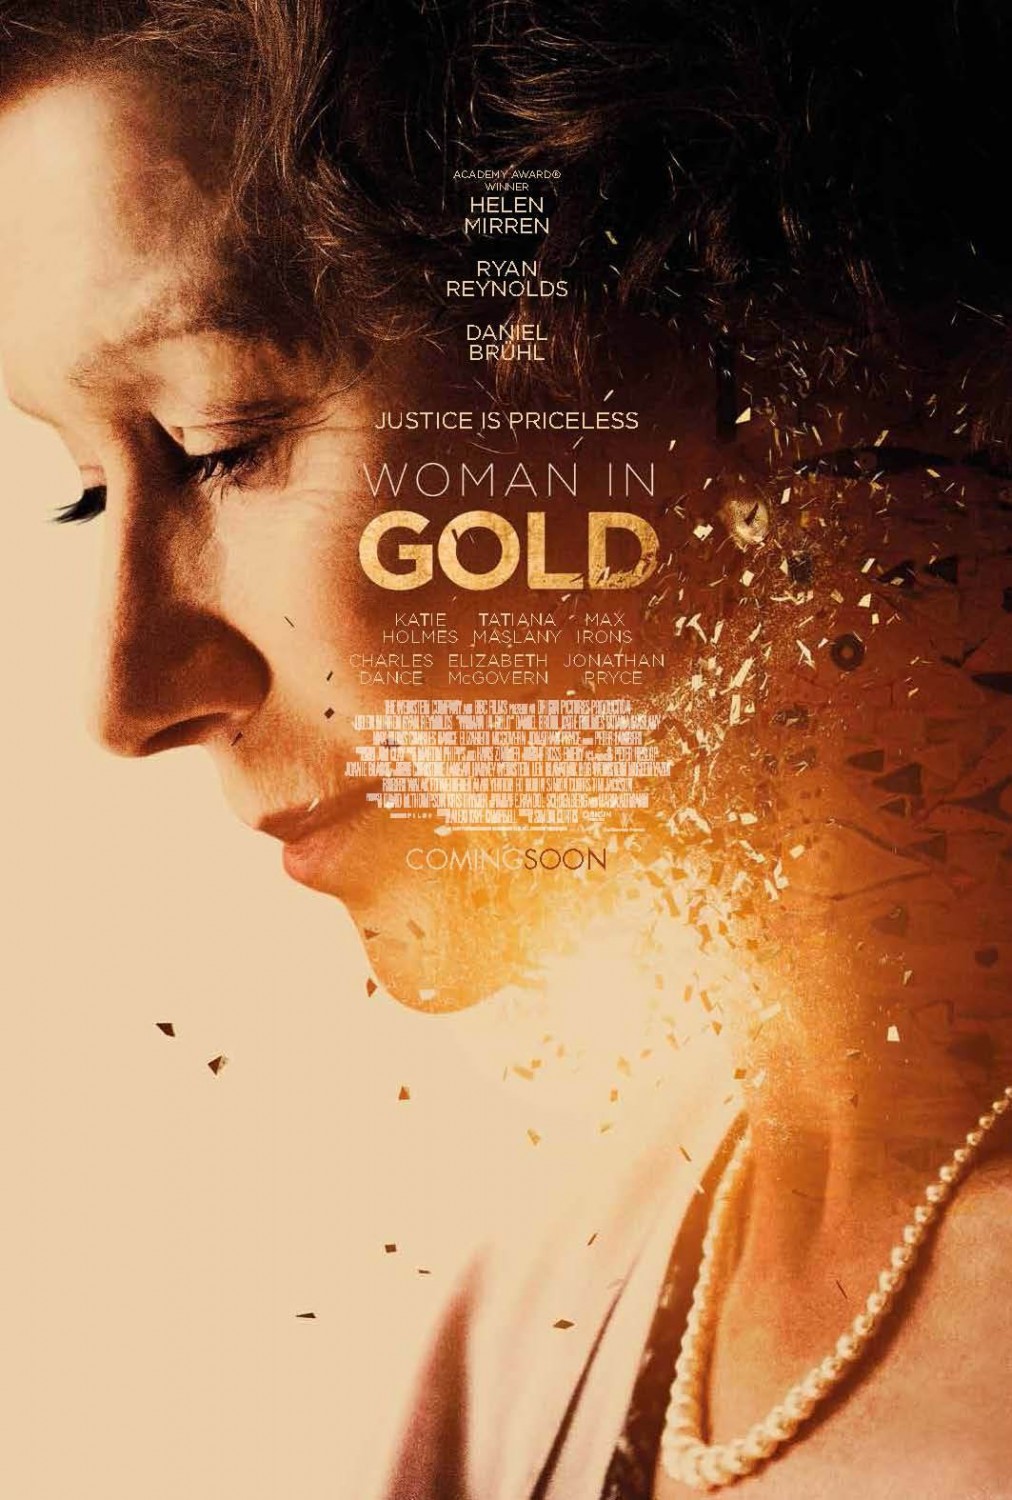  / 2015 Movie Poster Gallery / Woman in Gold 3 of 7 / XLG Image